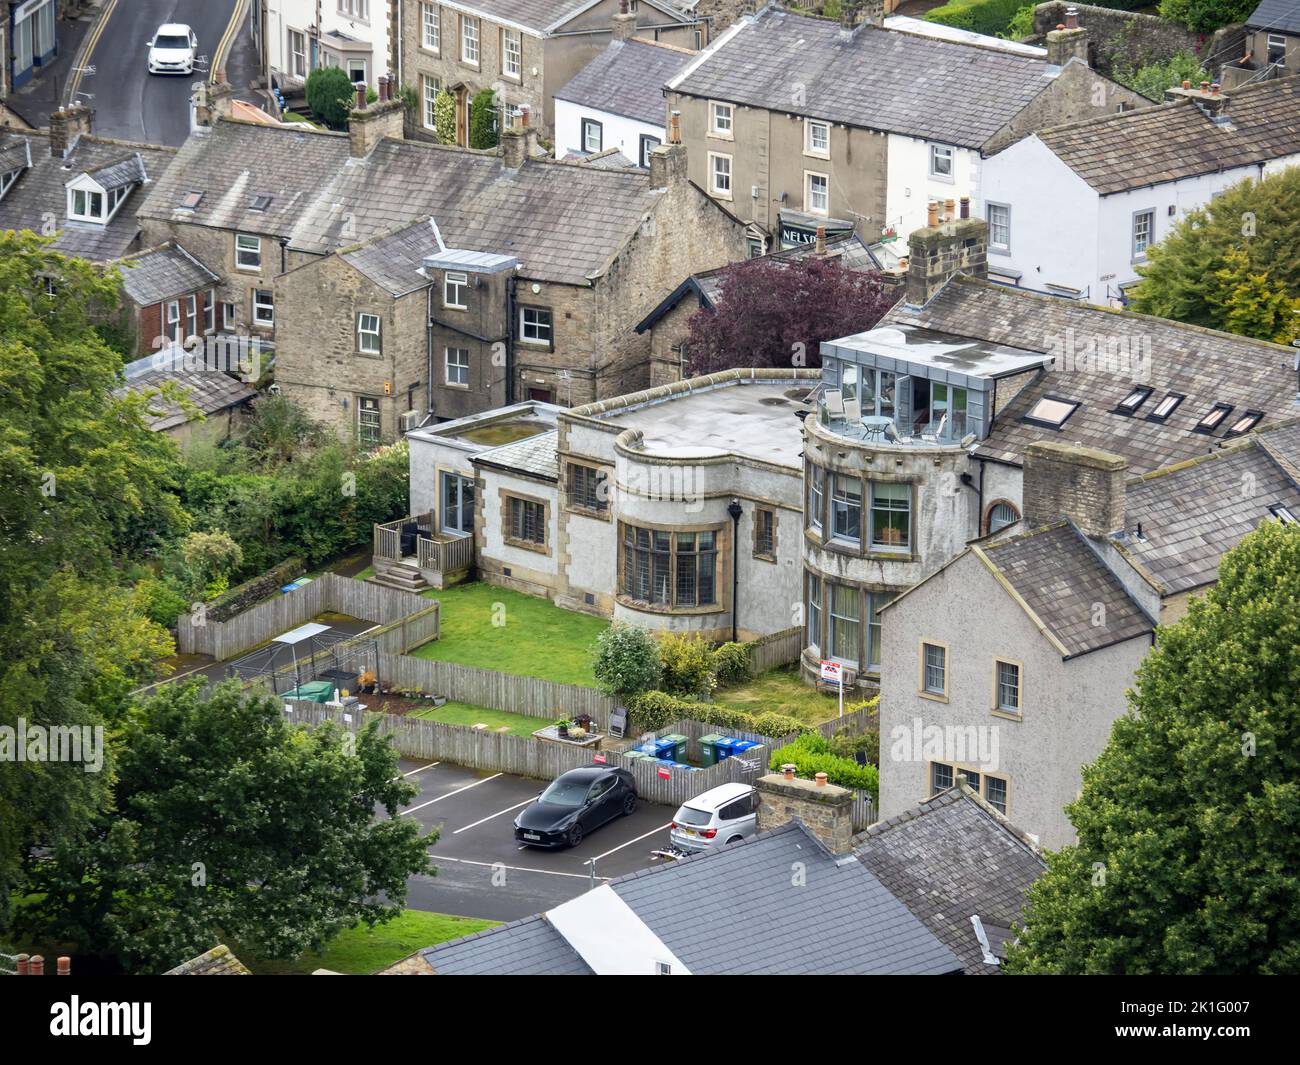 Looking down on Settle, Yorkshire Dales, UK. Stock Photo